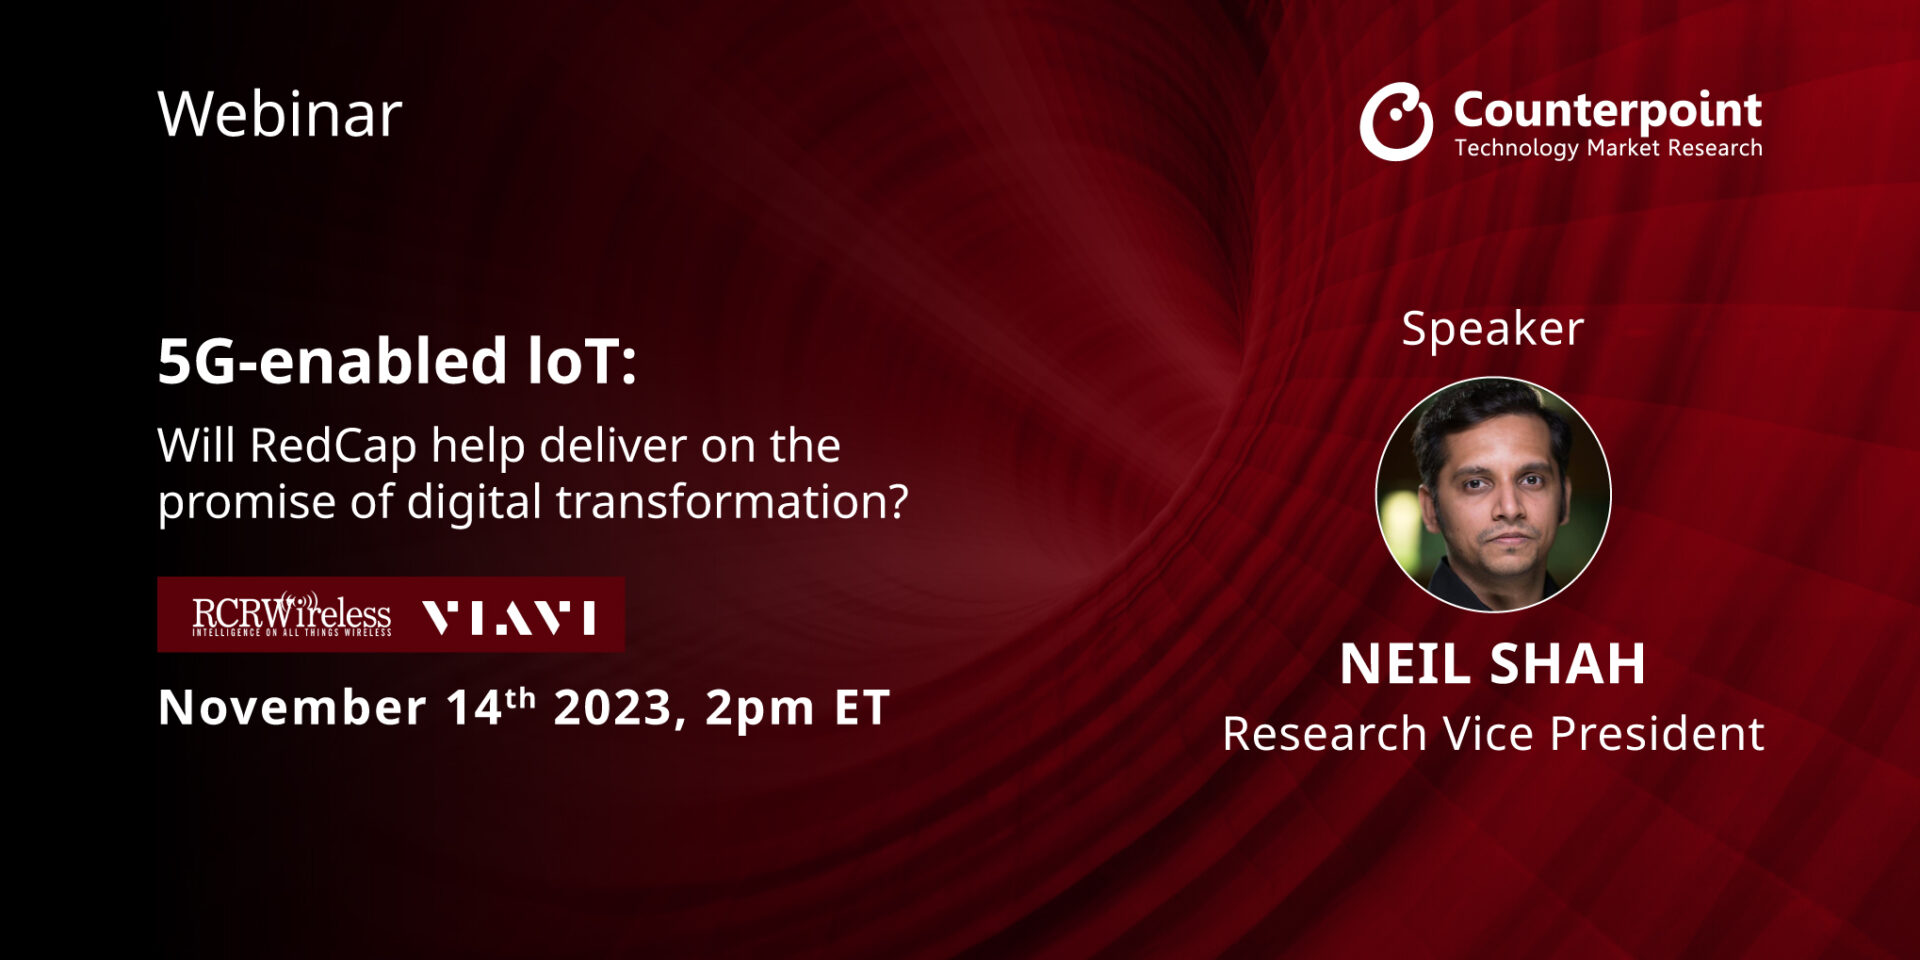 Webinar: 5G-enabled IoT: Will RedCap help Deliver on the Promise of Digital Transformation